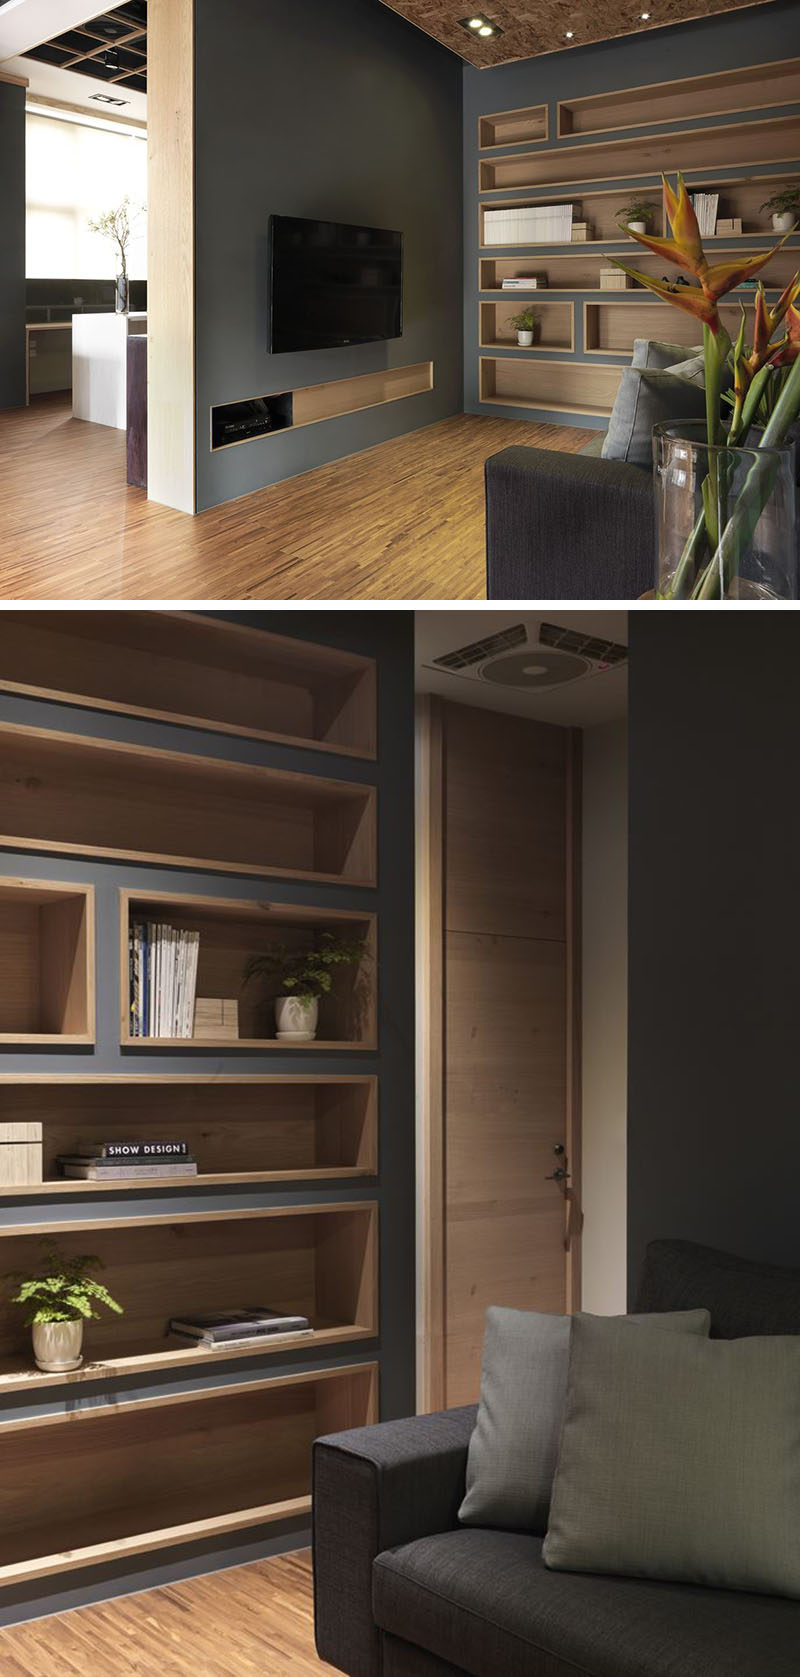 To make the built-in bookshelves on this deep grey wall stand out, the shelves were lined with wood to add a natural touch and create warmth in the office interior.